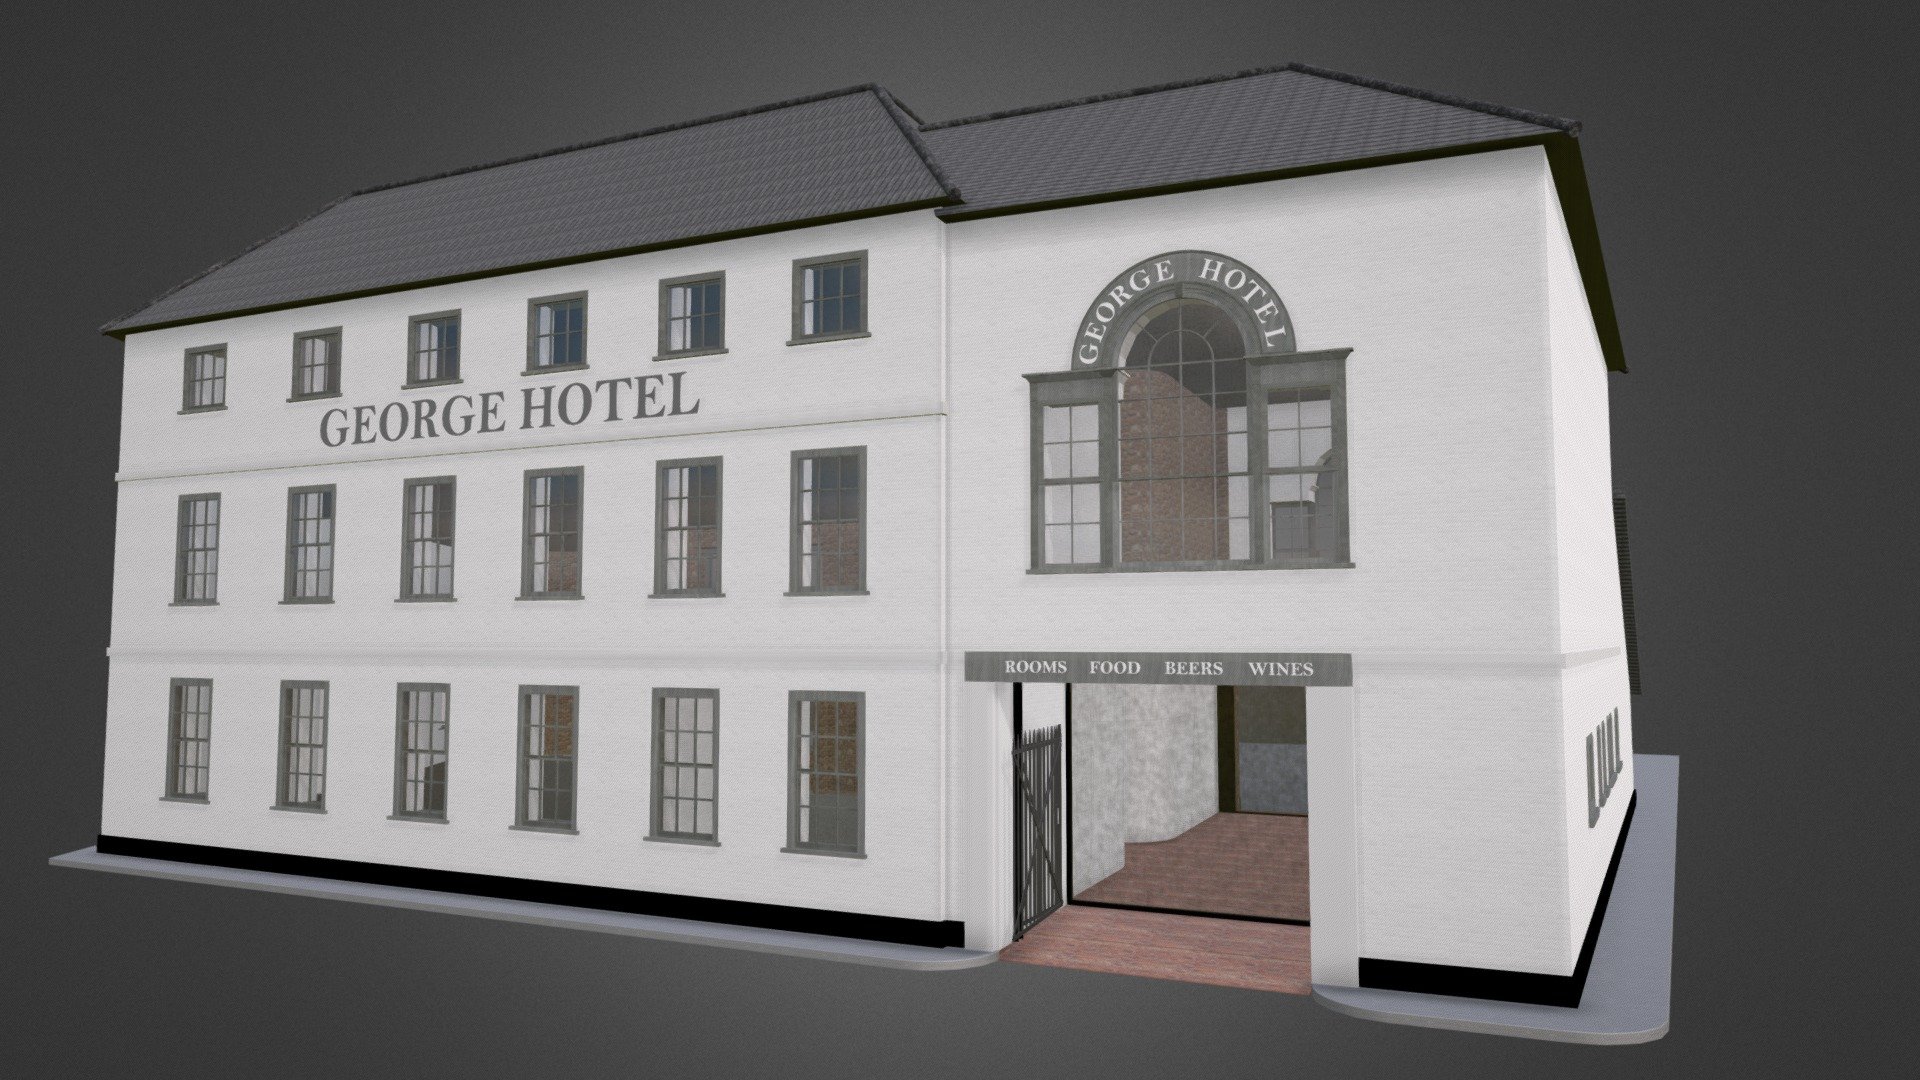 Hotel refurbishment for South Coast Inns. Developed and design by Hollington Architects LTD. 3D modeling and mapping by JdelCampo Architect + 3D Designer.

More Info: http://www.hollington-architects.co.uk/ Profile: www.jdelcampo.com - The George Hotel, Axminster - 3D model by JdelCampo (@jesusdelcampo) 3d model